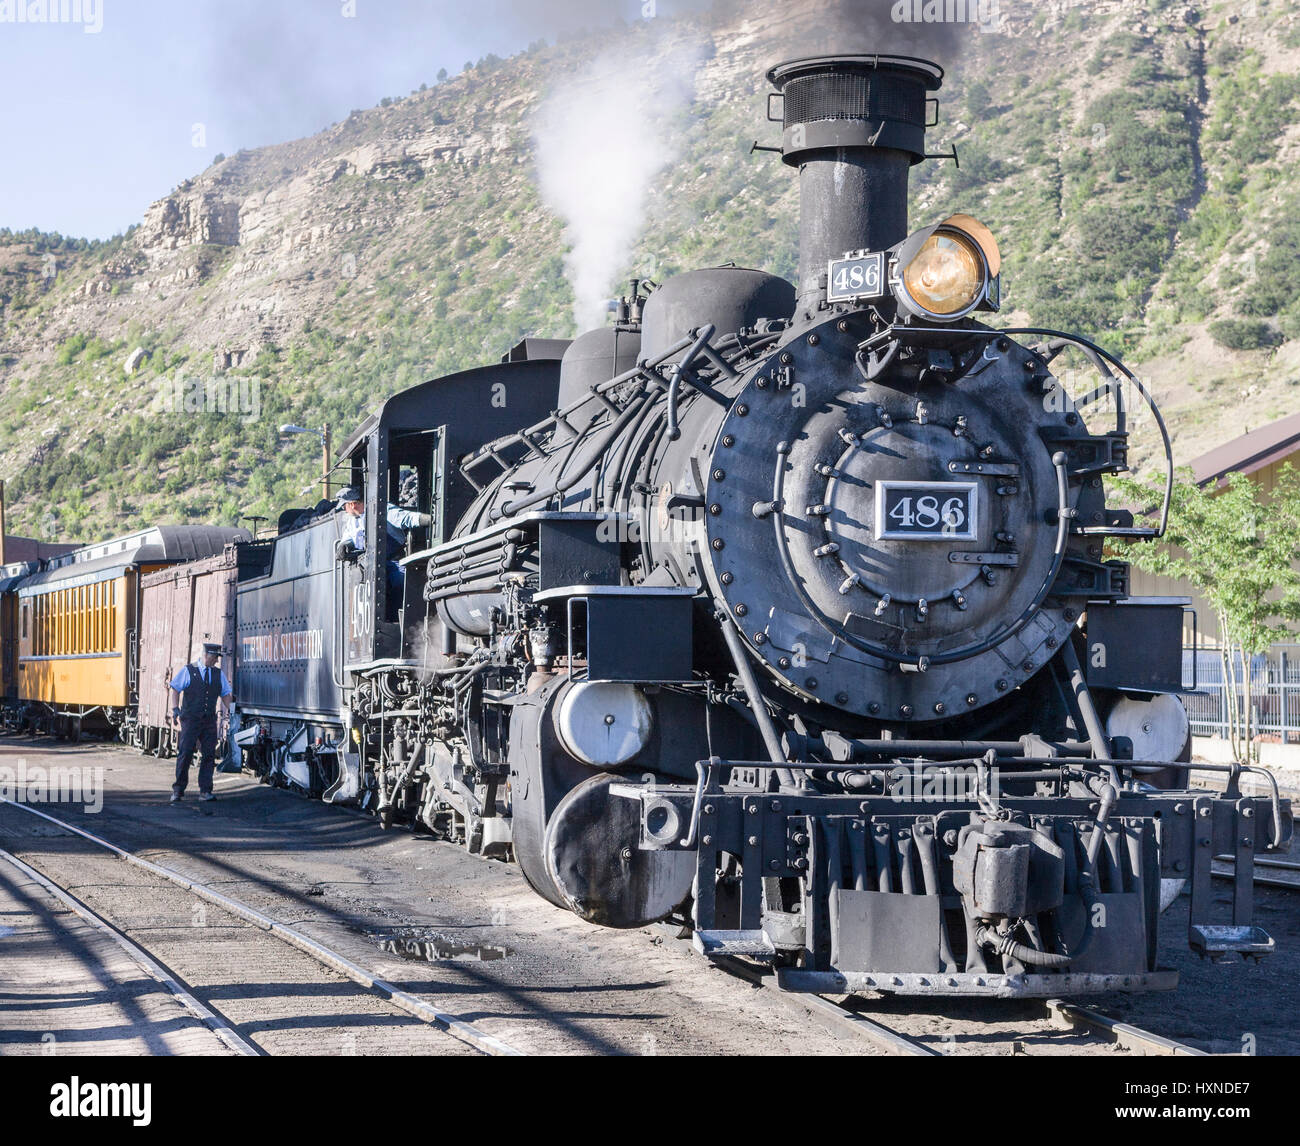 Durango, CO, USA - 21 August 2008: Engineer & Conductor readying Durango & Silverton Narrow Gauge Railroad steam locomotive and train for departure Stock Photo